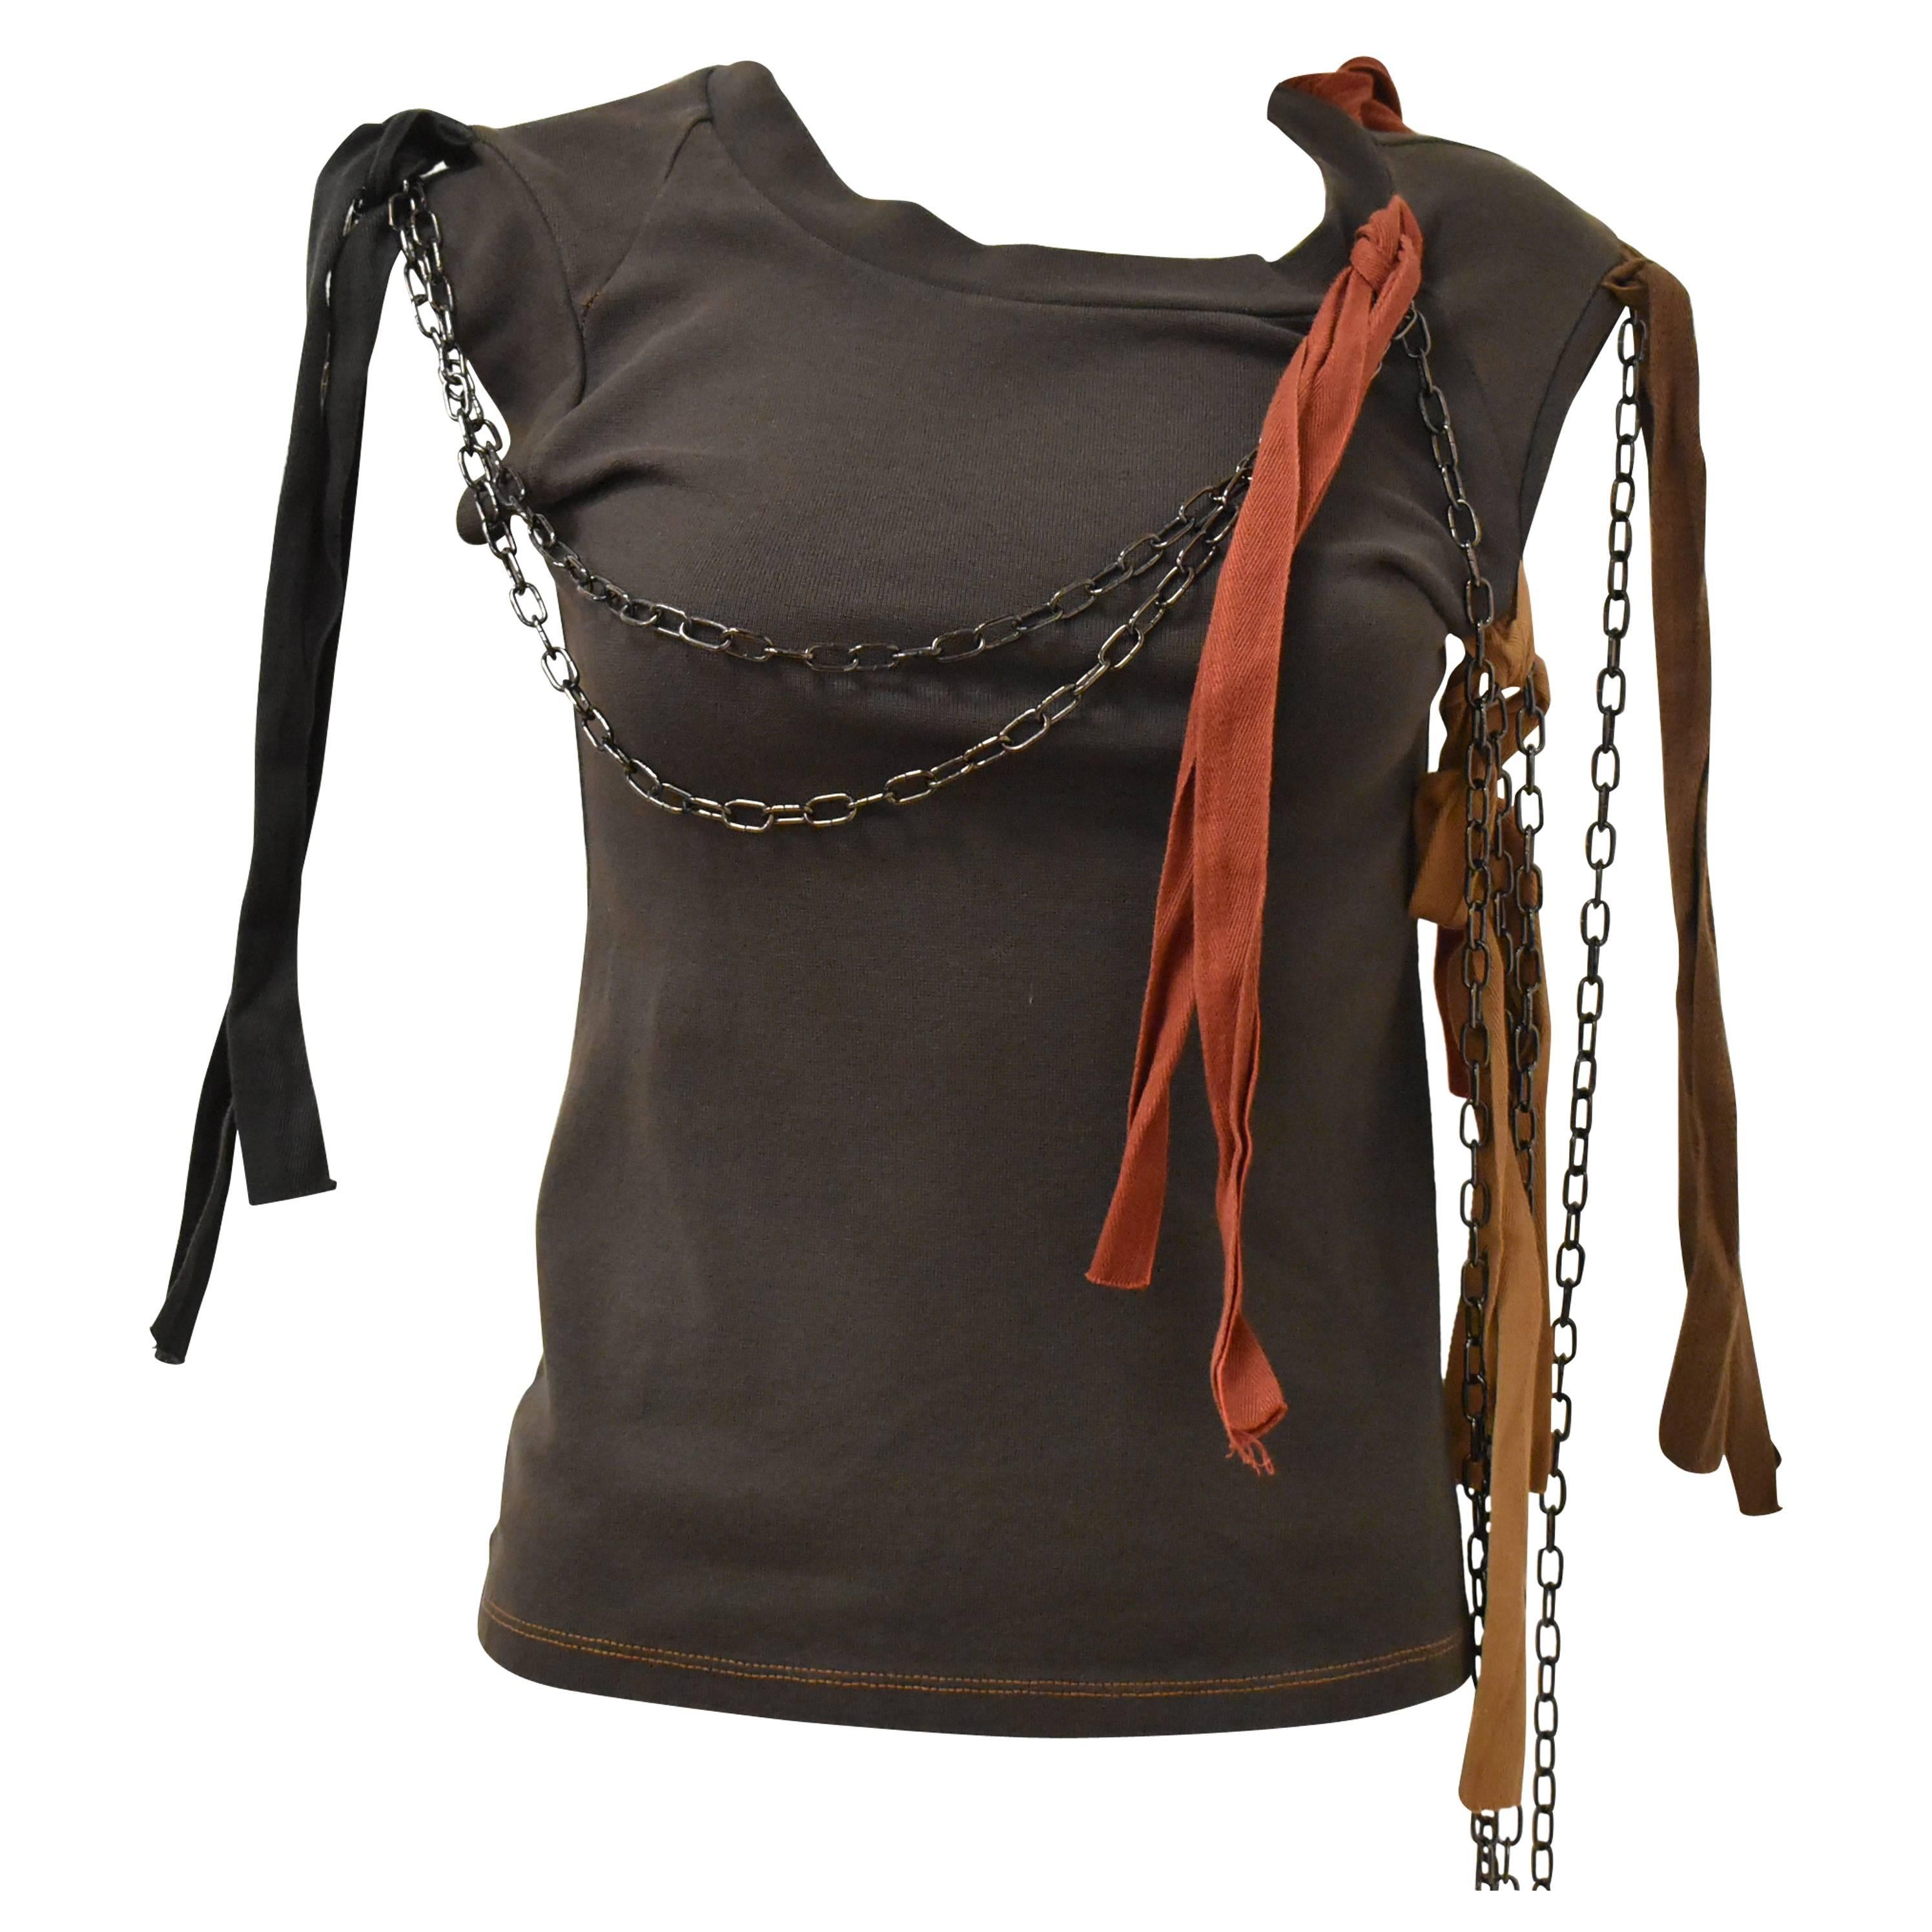 Vivienne Westwood Brown Top with Metal Chains and Ribbons